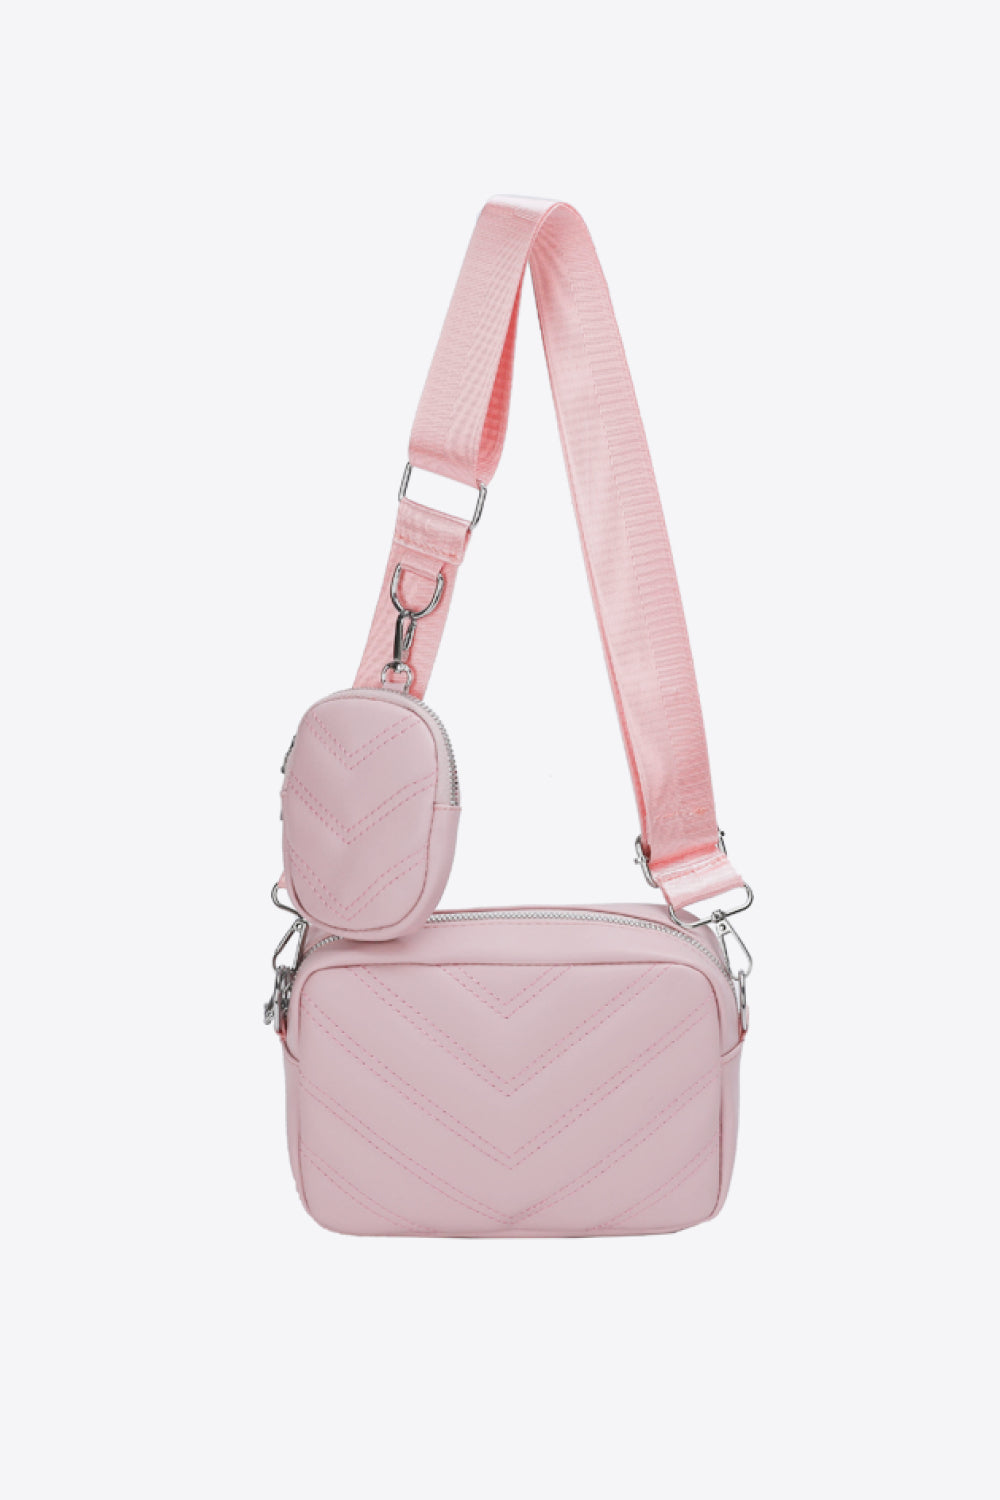 PREORDER- PU Leather Shoulder Bag with Small Purse